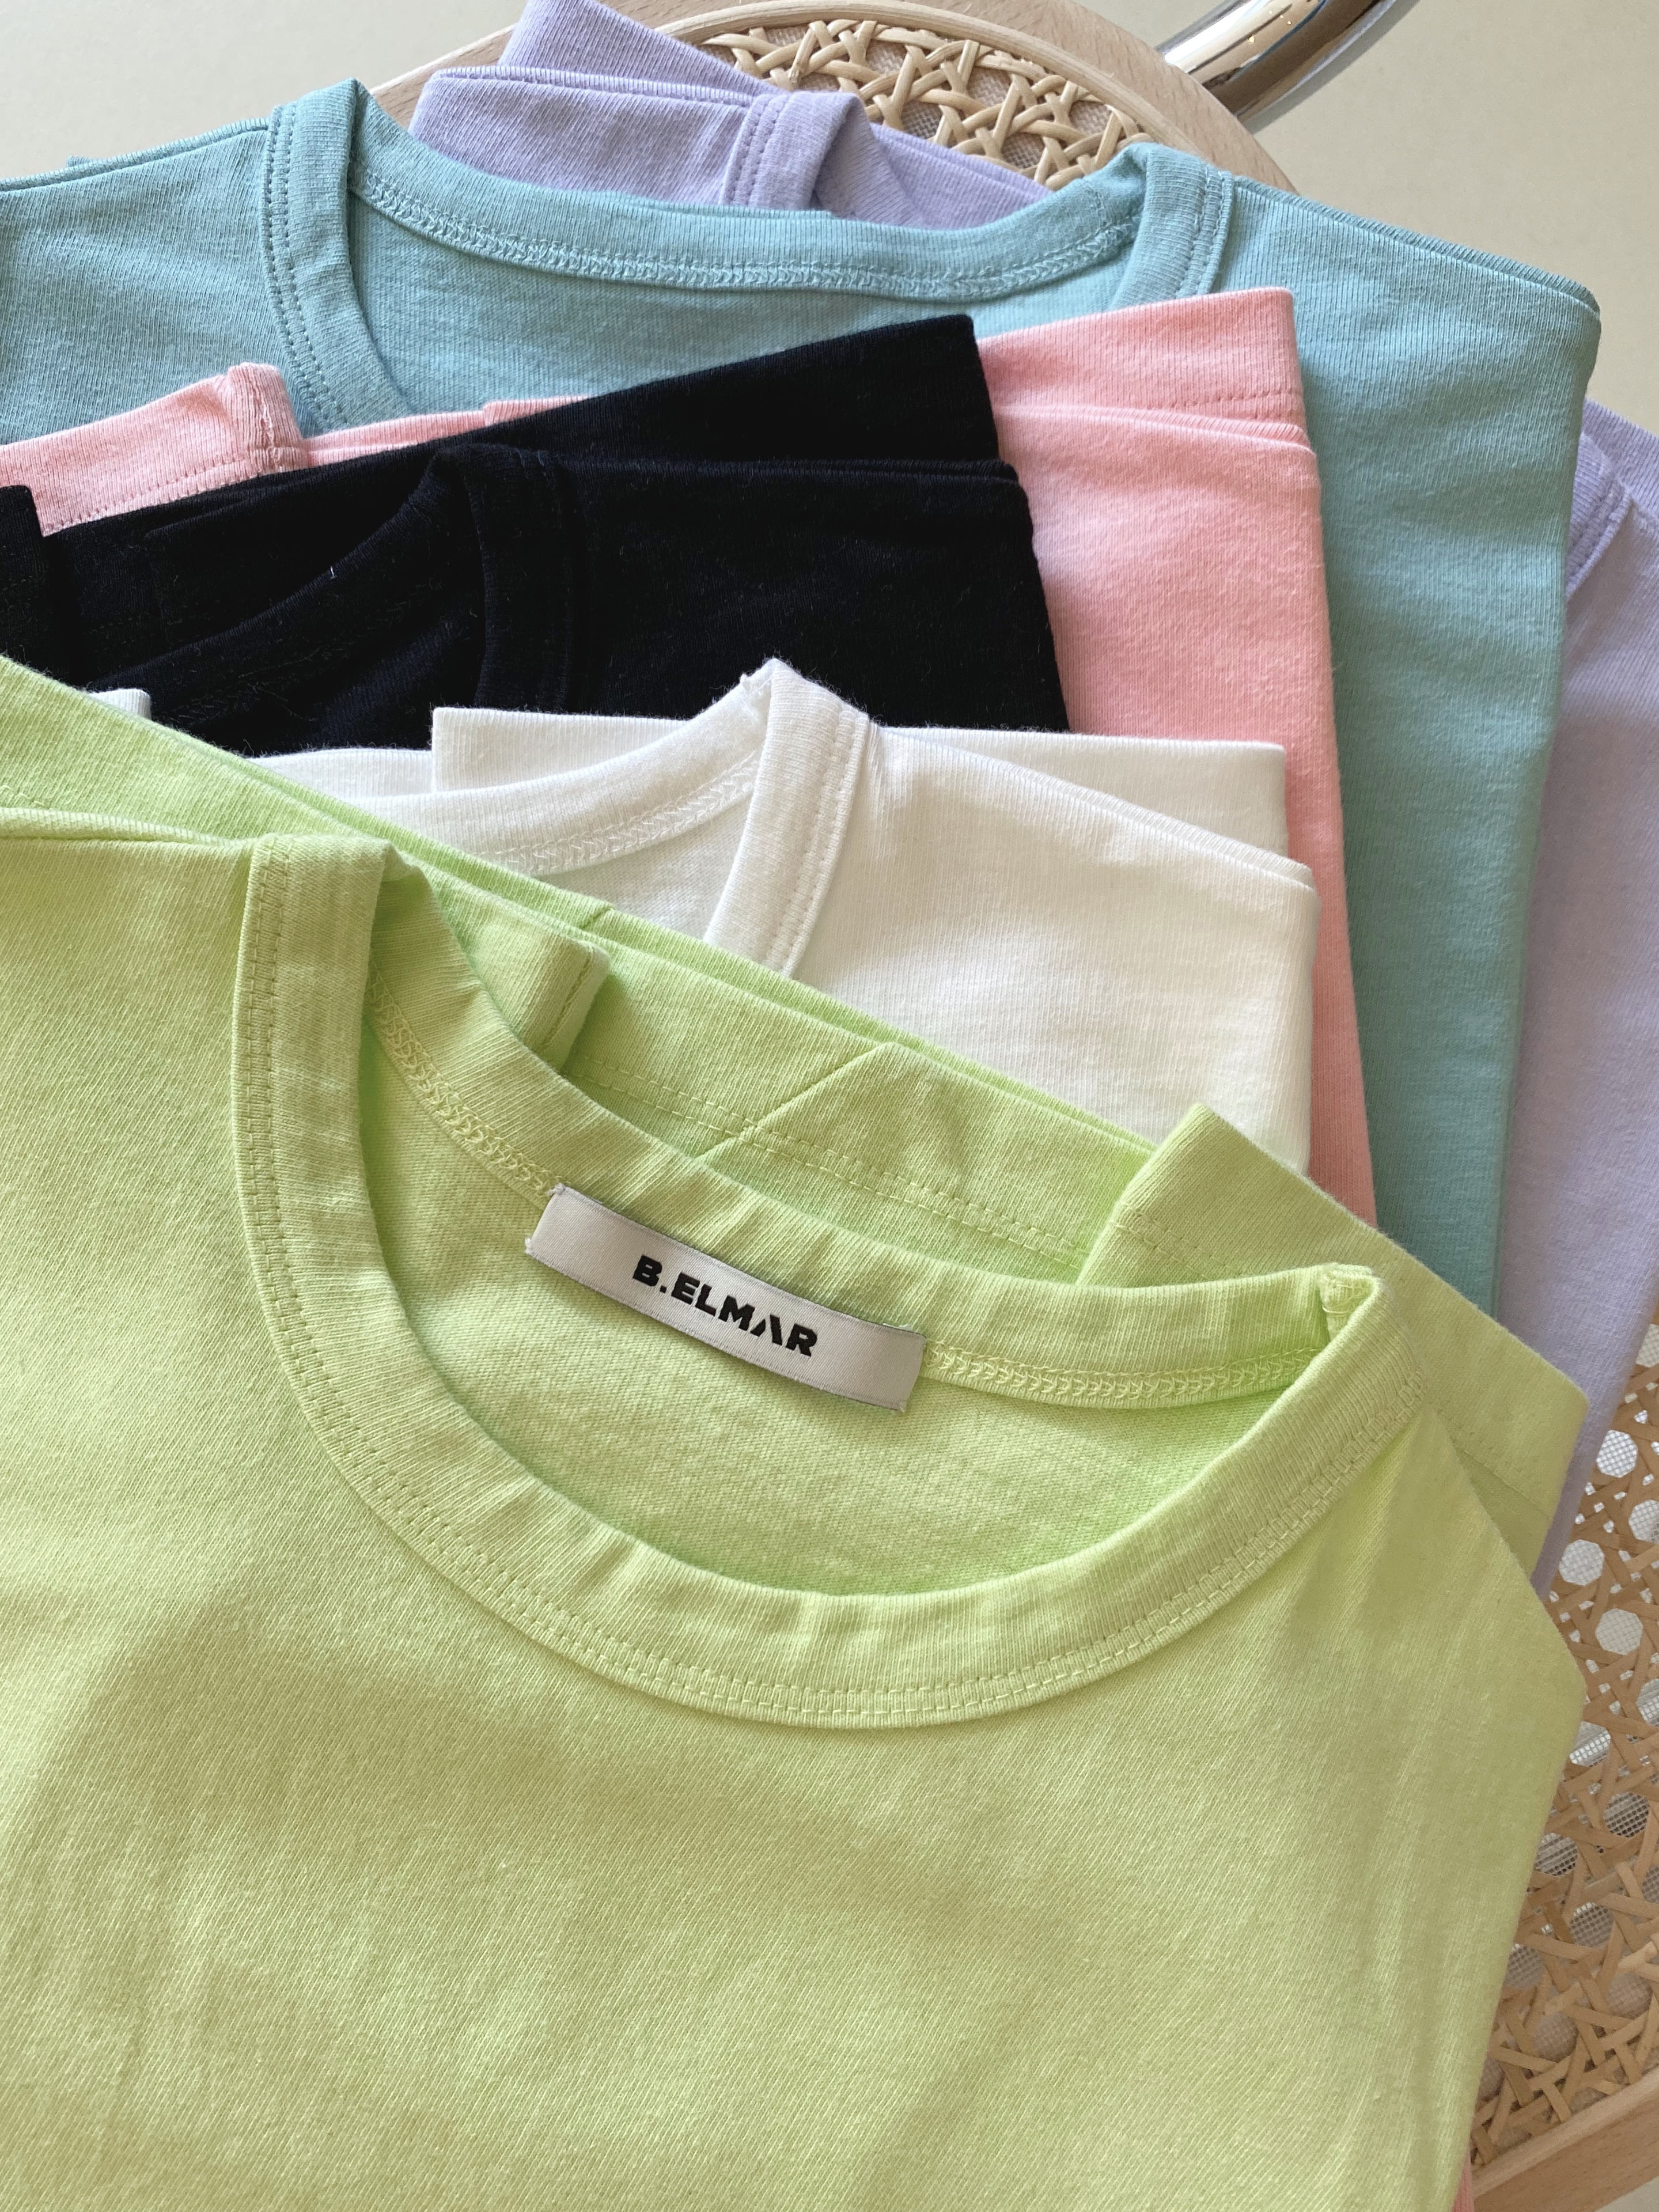 Colorful T-Shirts